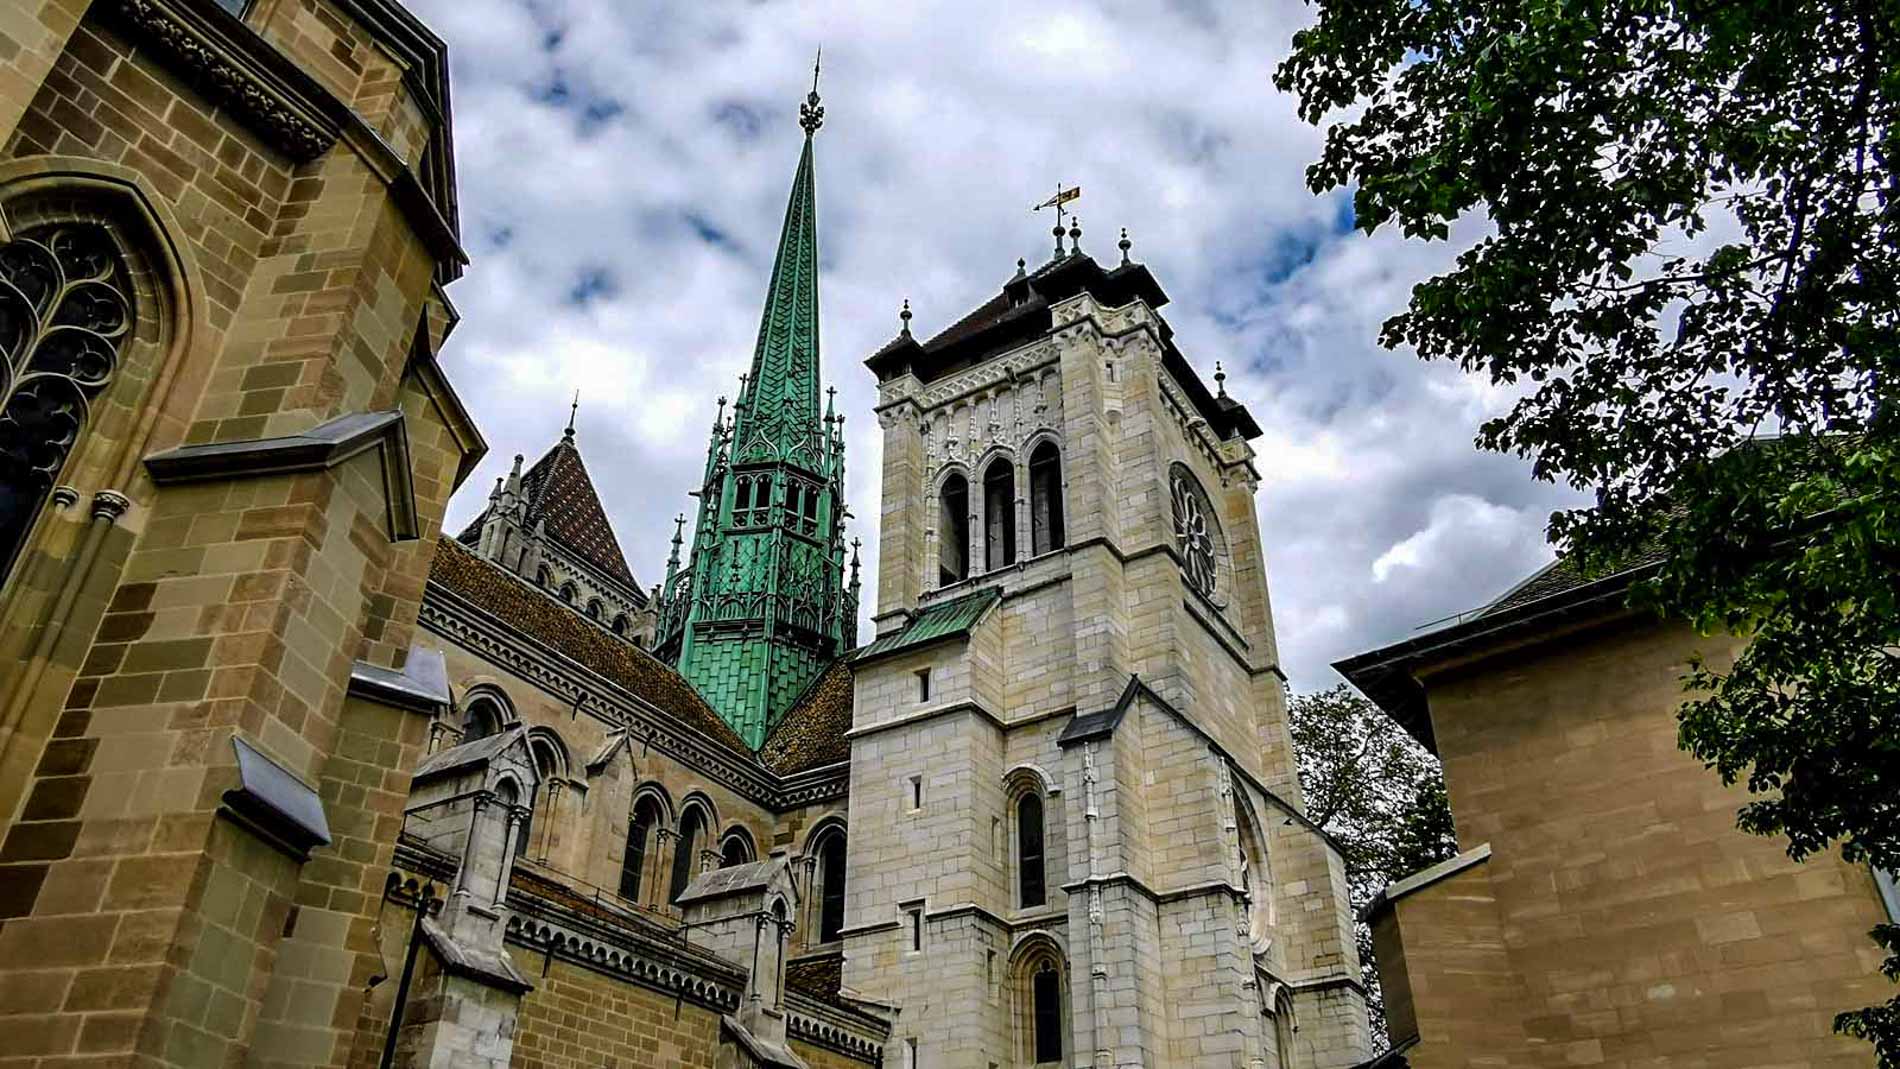 The cathedral of Saint Pierre in Geneva with its  white stone tower and the copper green spire